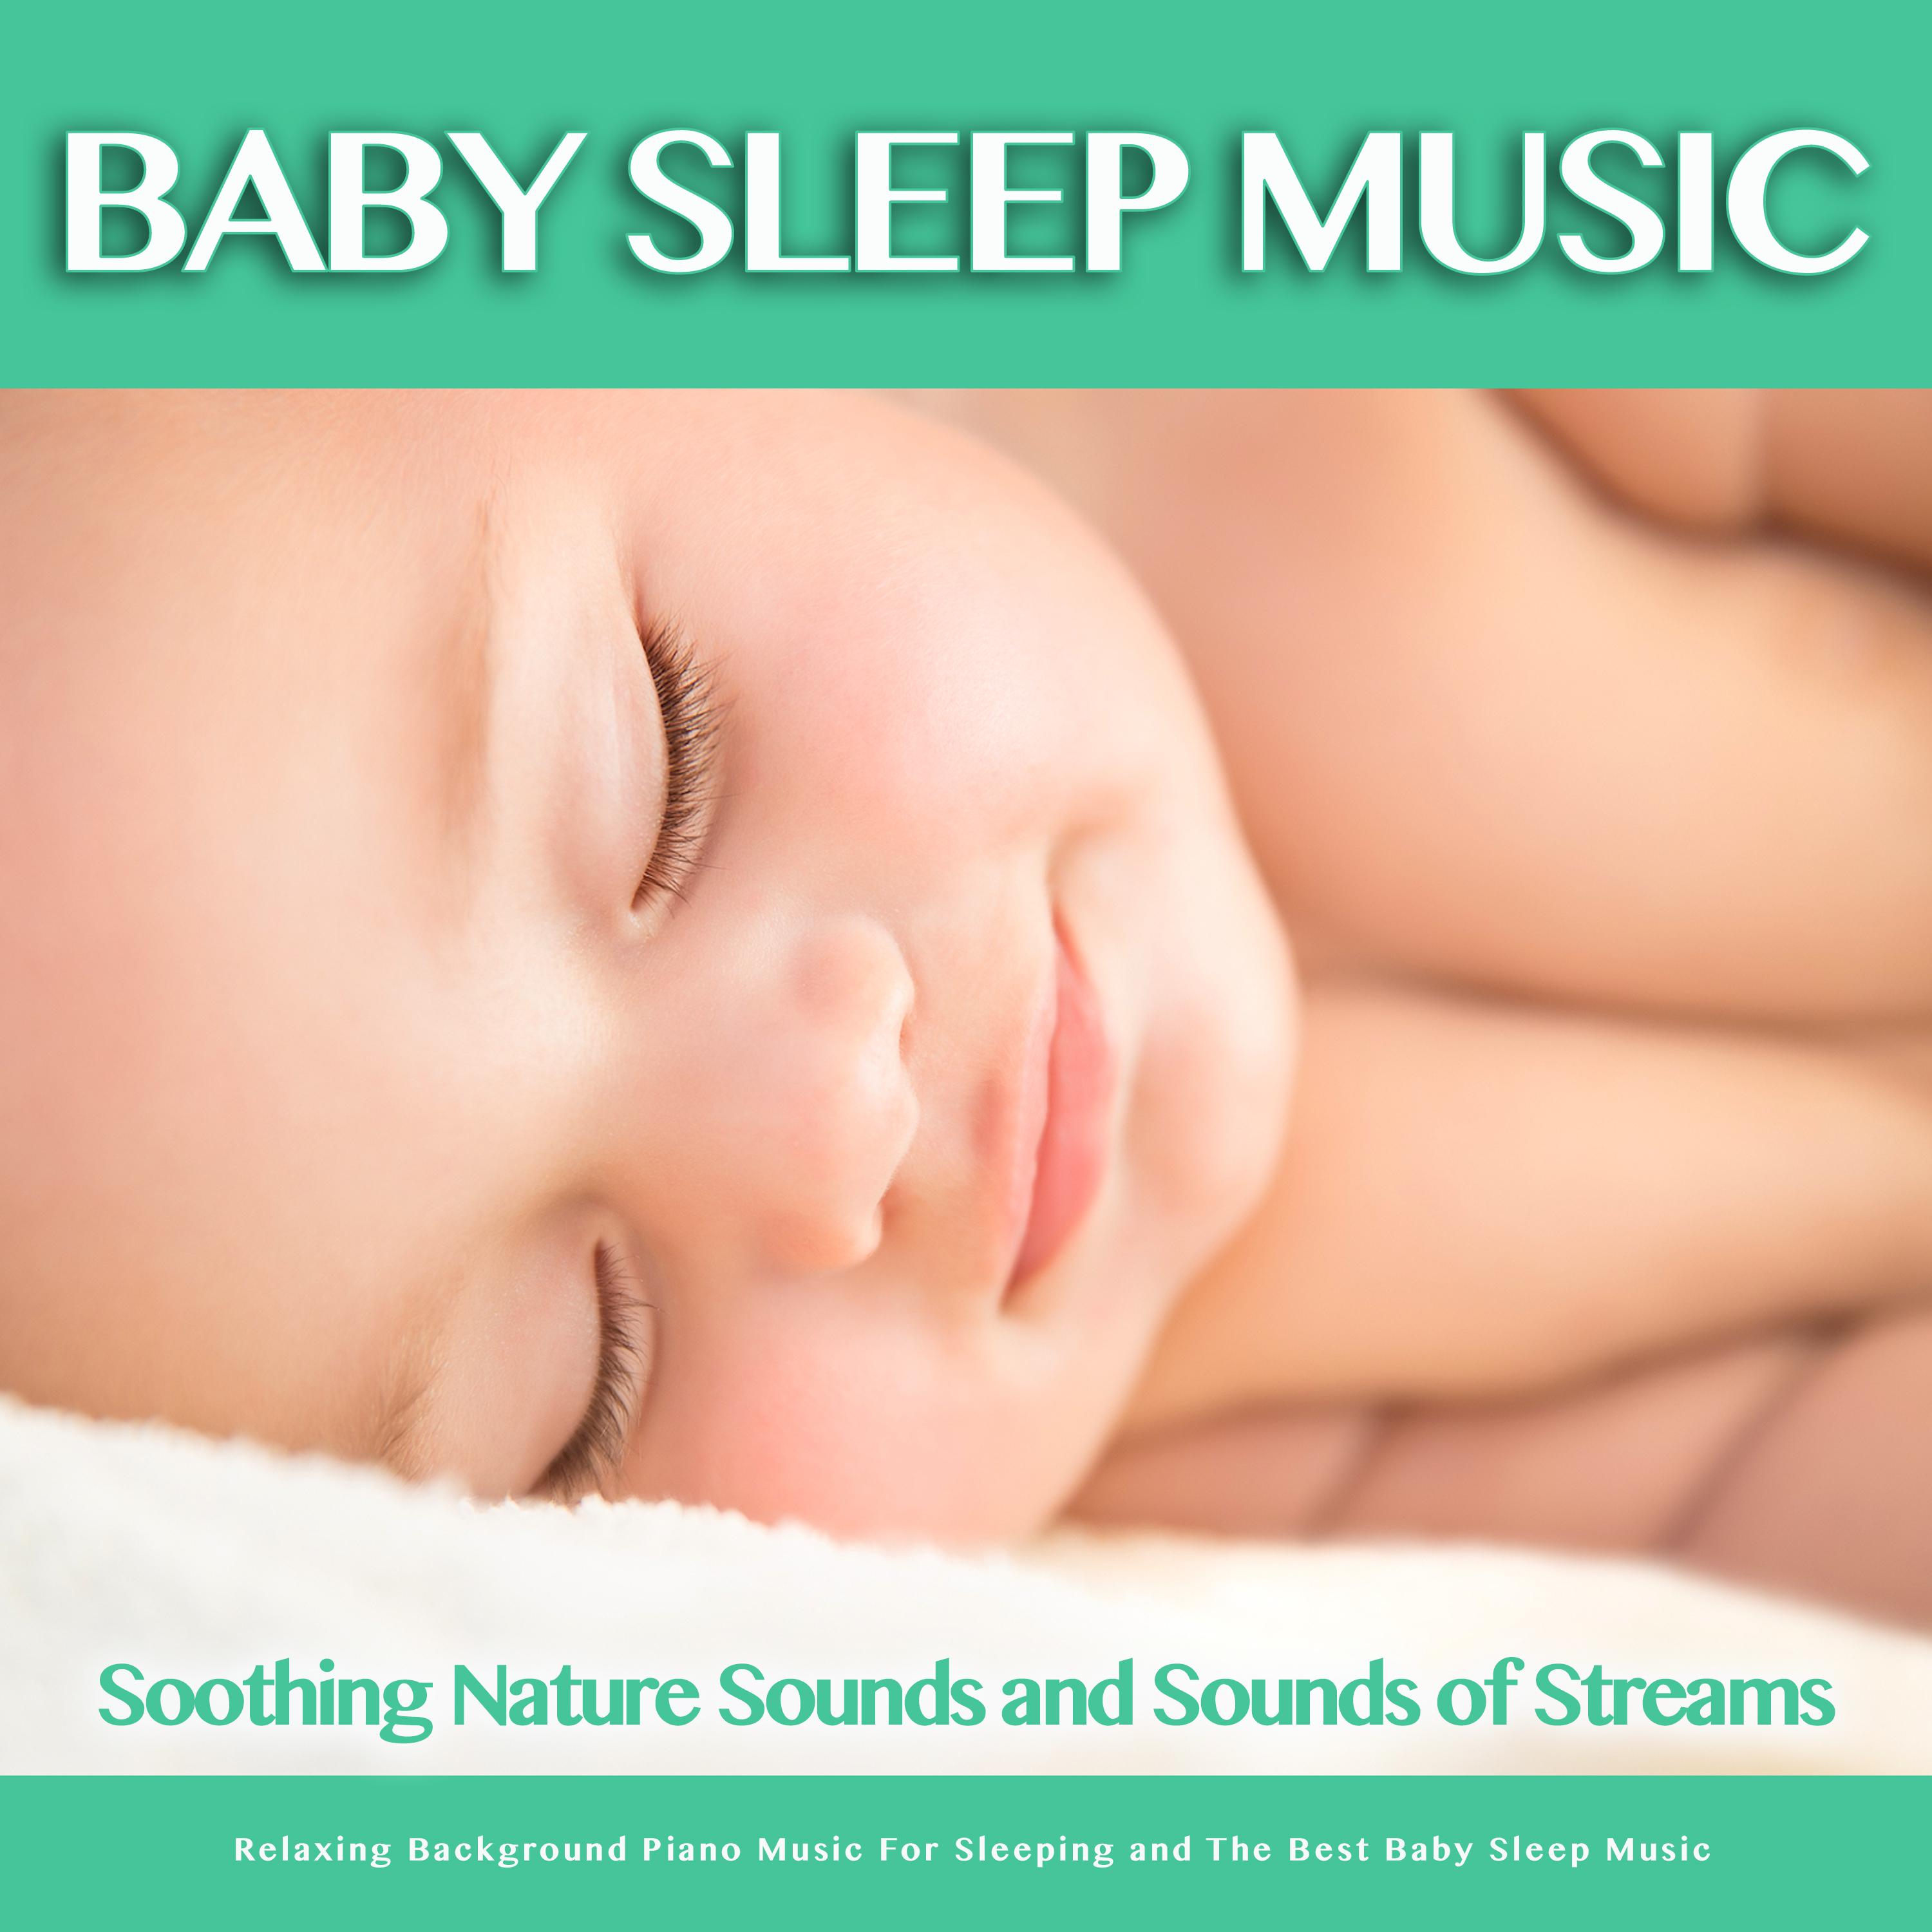 Baby Lullabies and Sounds of a Stream